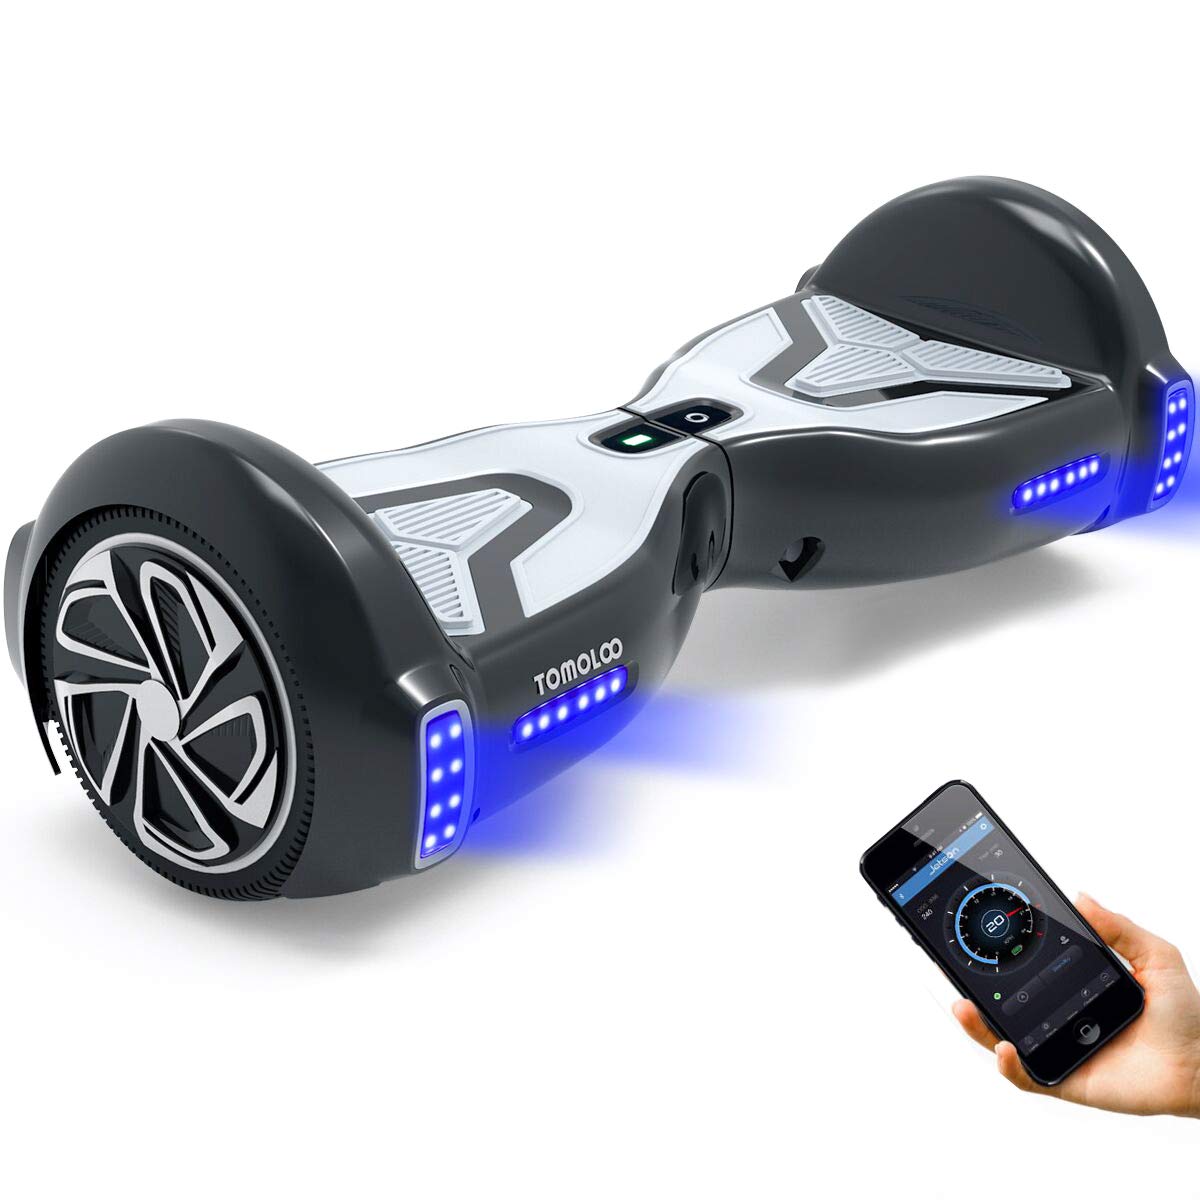 Buy TOMOLOO Hoverboard for Kids and Adult, 6.5 Two Wheels App Controlled  Electric Self Balancing Scooter UL2272 Certified Online in Hong Kong.  B07JYJKQYK